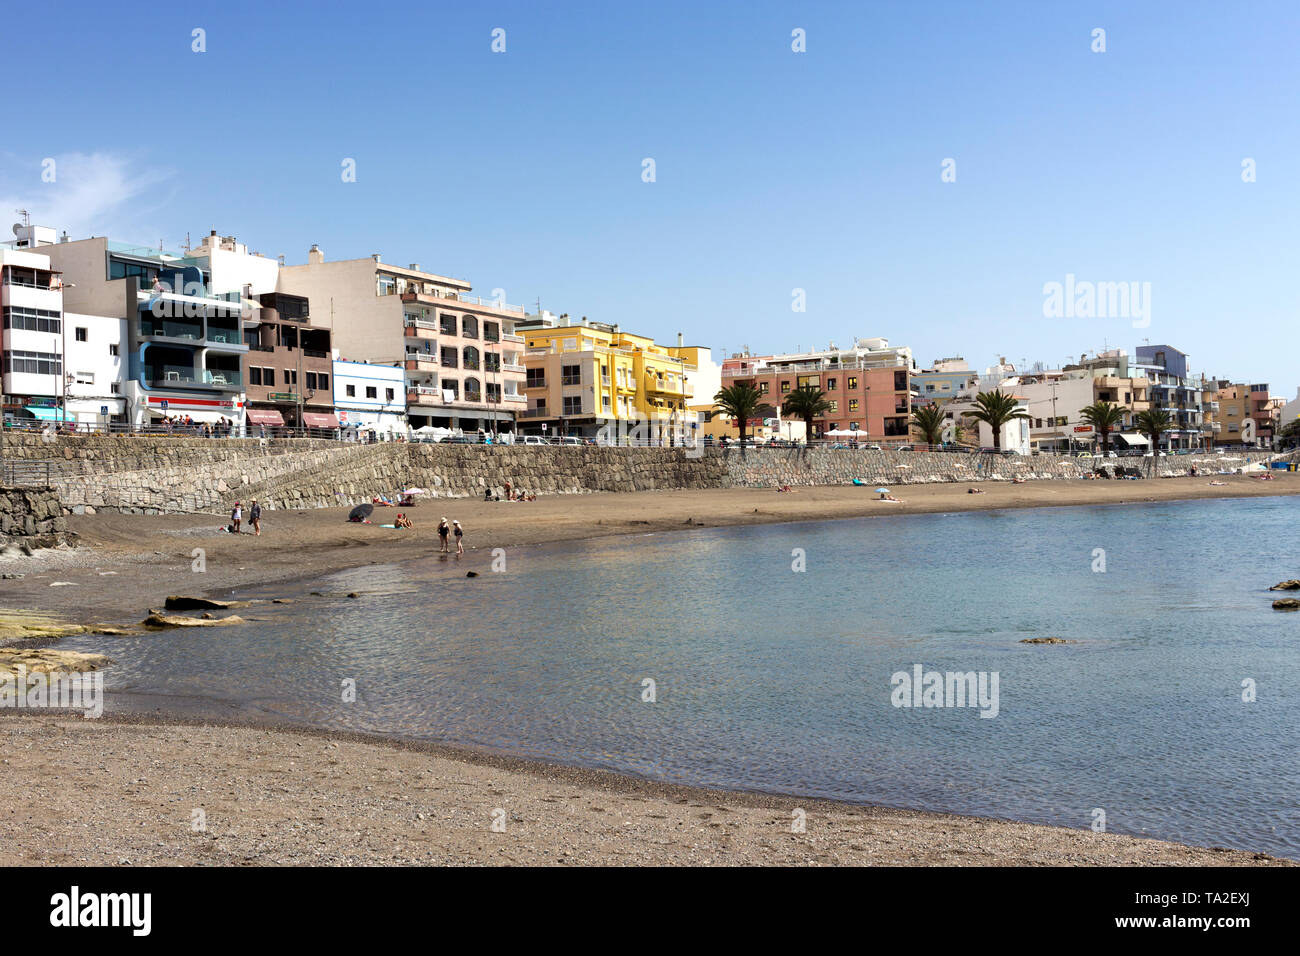 Gran Canaria, Spain - March 14, 2019:  Arguineguin, people enjoy relax on the beach. Arguineguin is one of the most populated towns along the south co Stock Photo